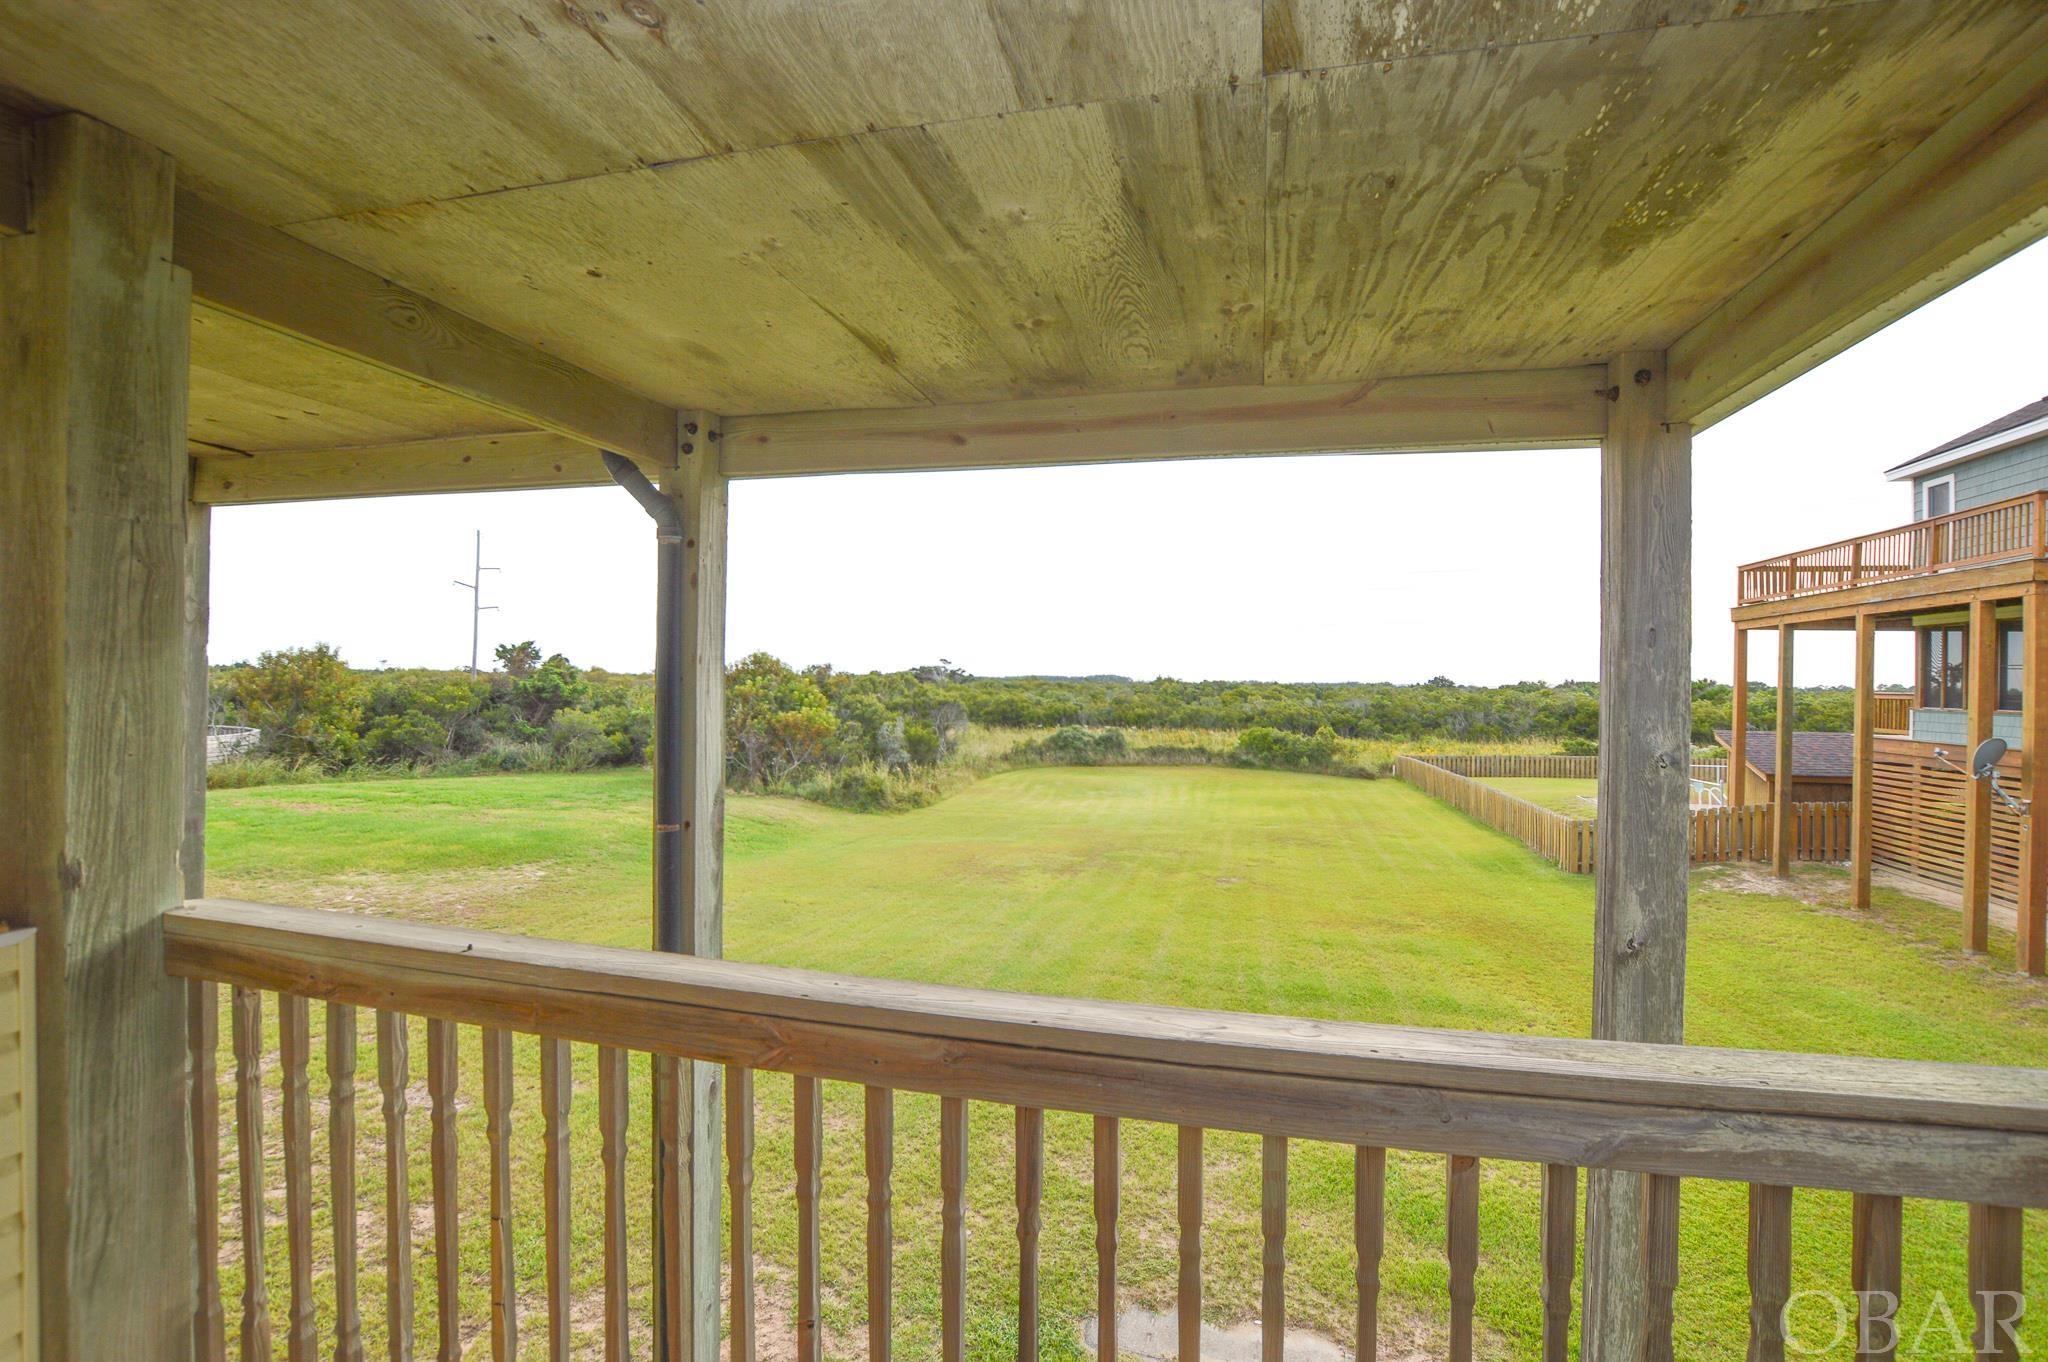 8918 Old Oregon Inlet Road, Nags Head, NC 27959, 4 Bedrooms Bedrooms, ,4 BathroomsBathrooms,Residential,For Sale,Old Oregon Inlet Road,120566